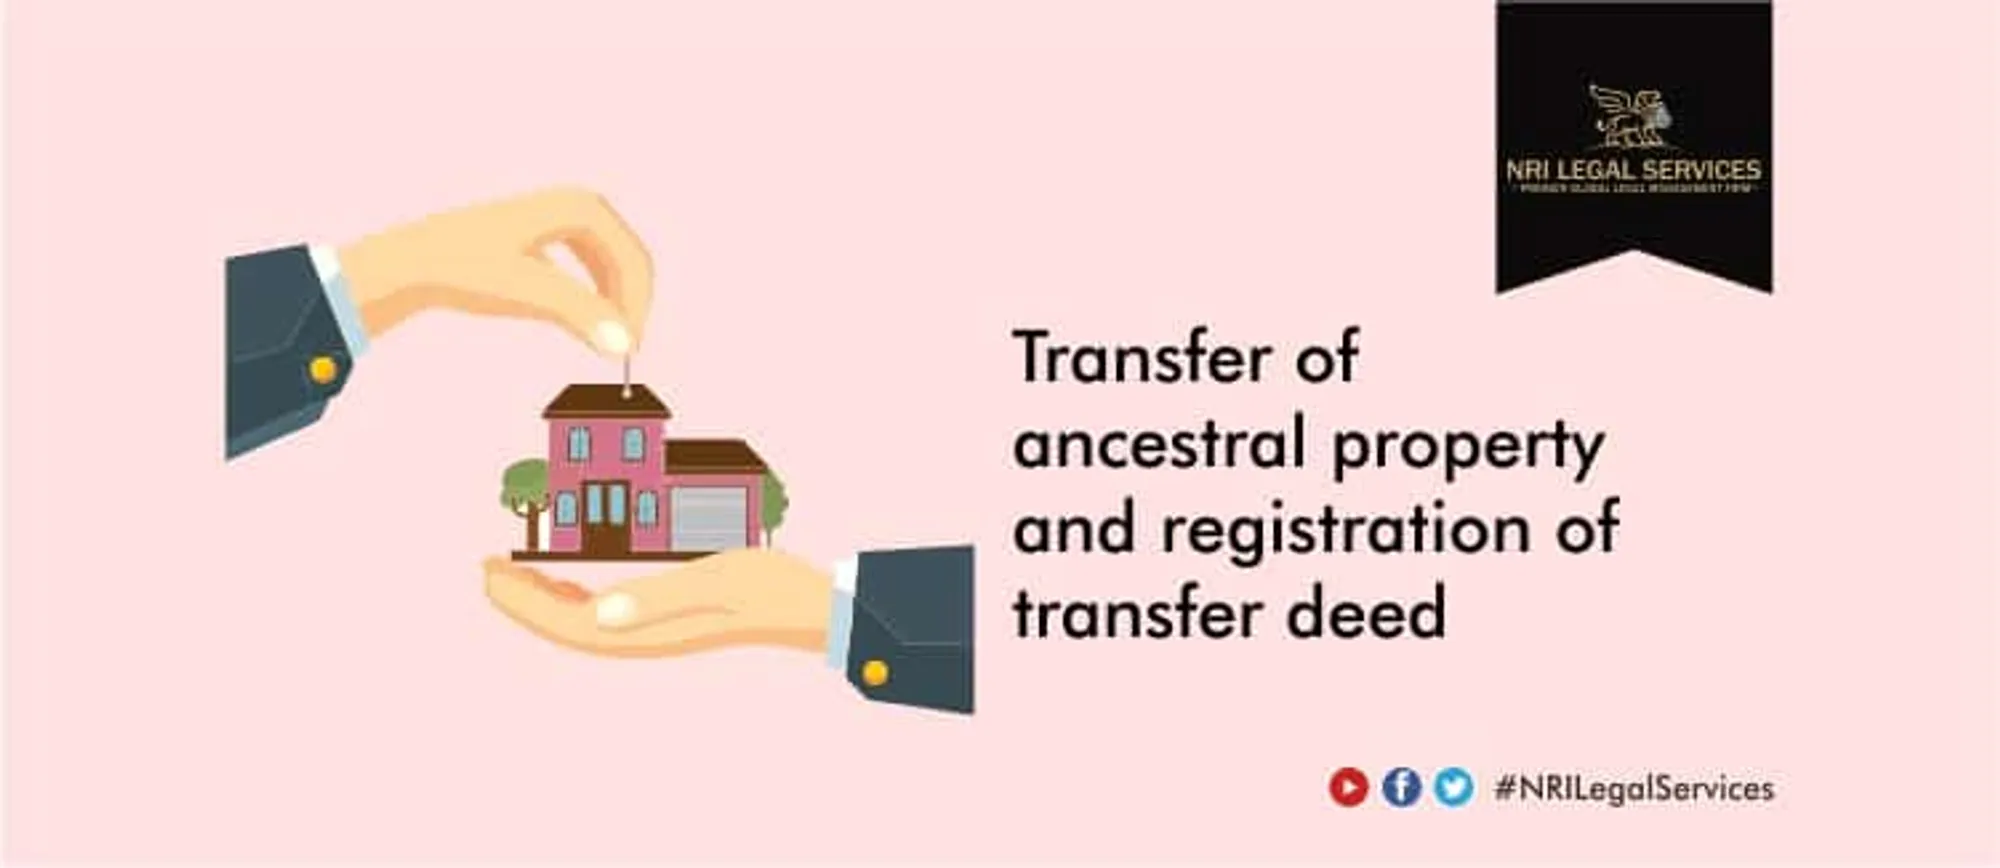 Transfer-of-ancestral-property-and-registration-of-transfer-deed-India